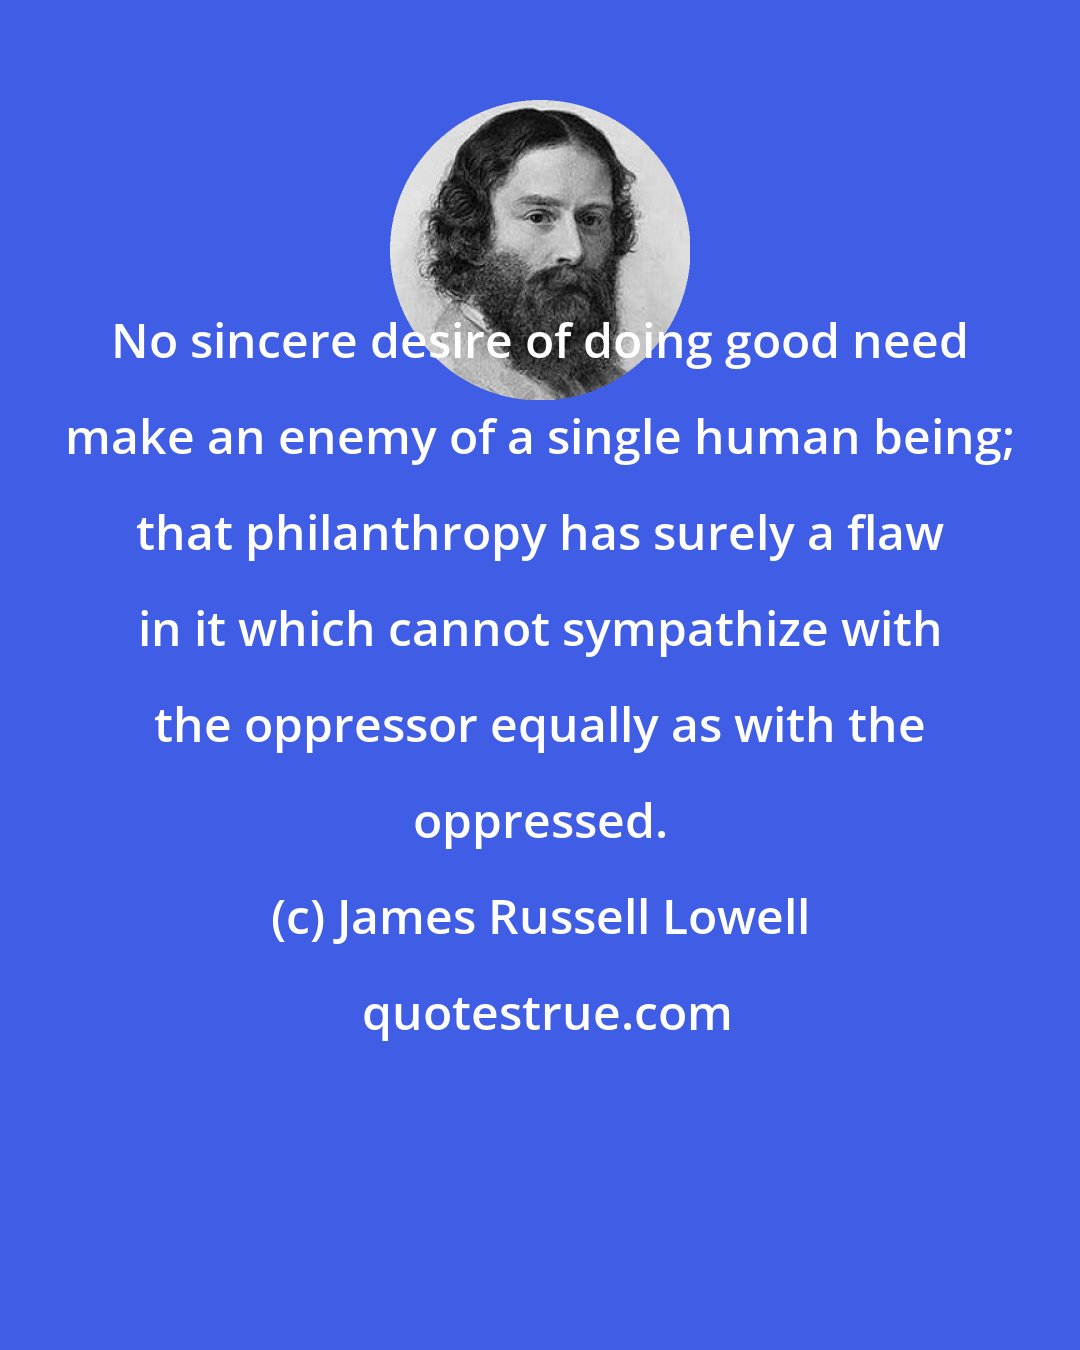 James Russell Lowell: No sincere desire of doing good need make an enemy of a single human being; that philanthropy has surely a flaw in it which cannot sympathize with the oppressor equally as with the oppressed.